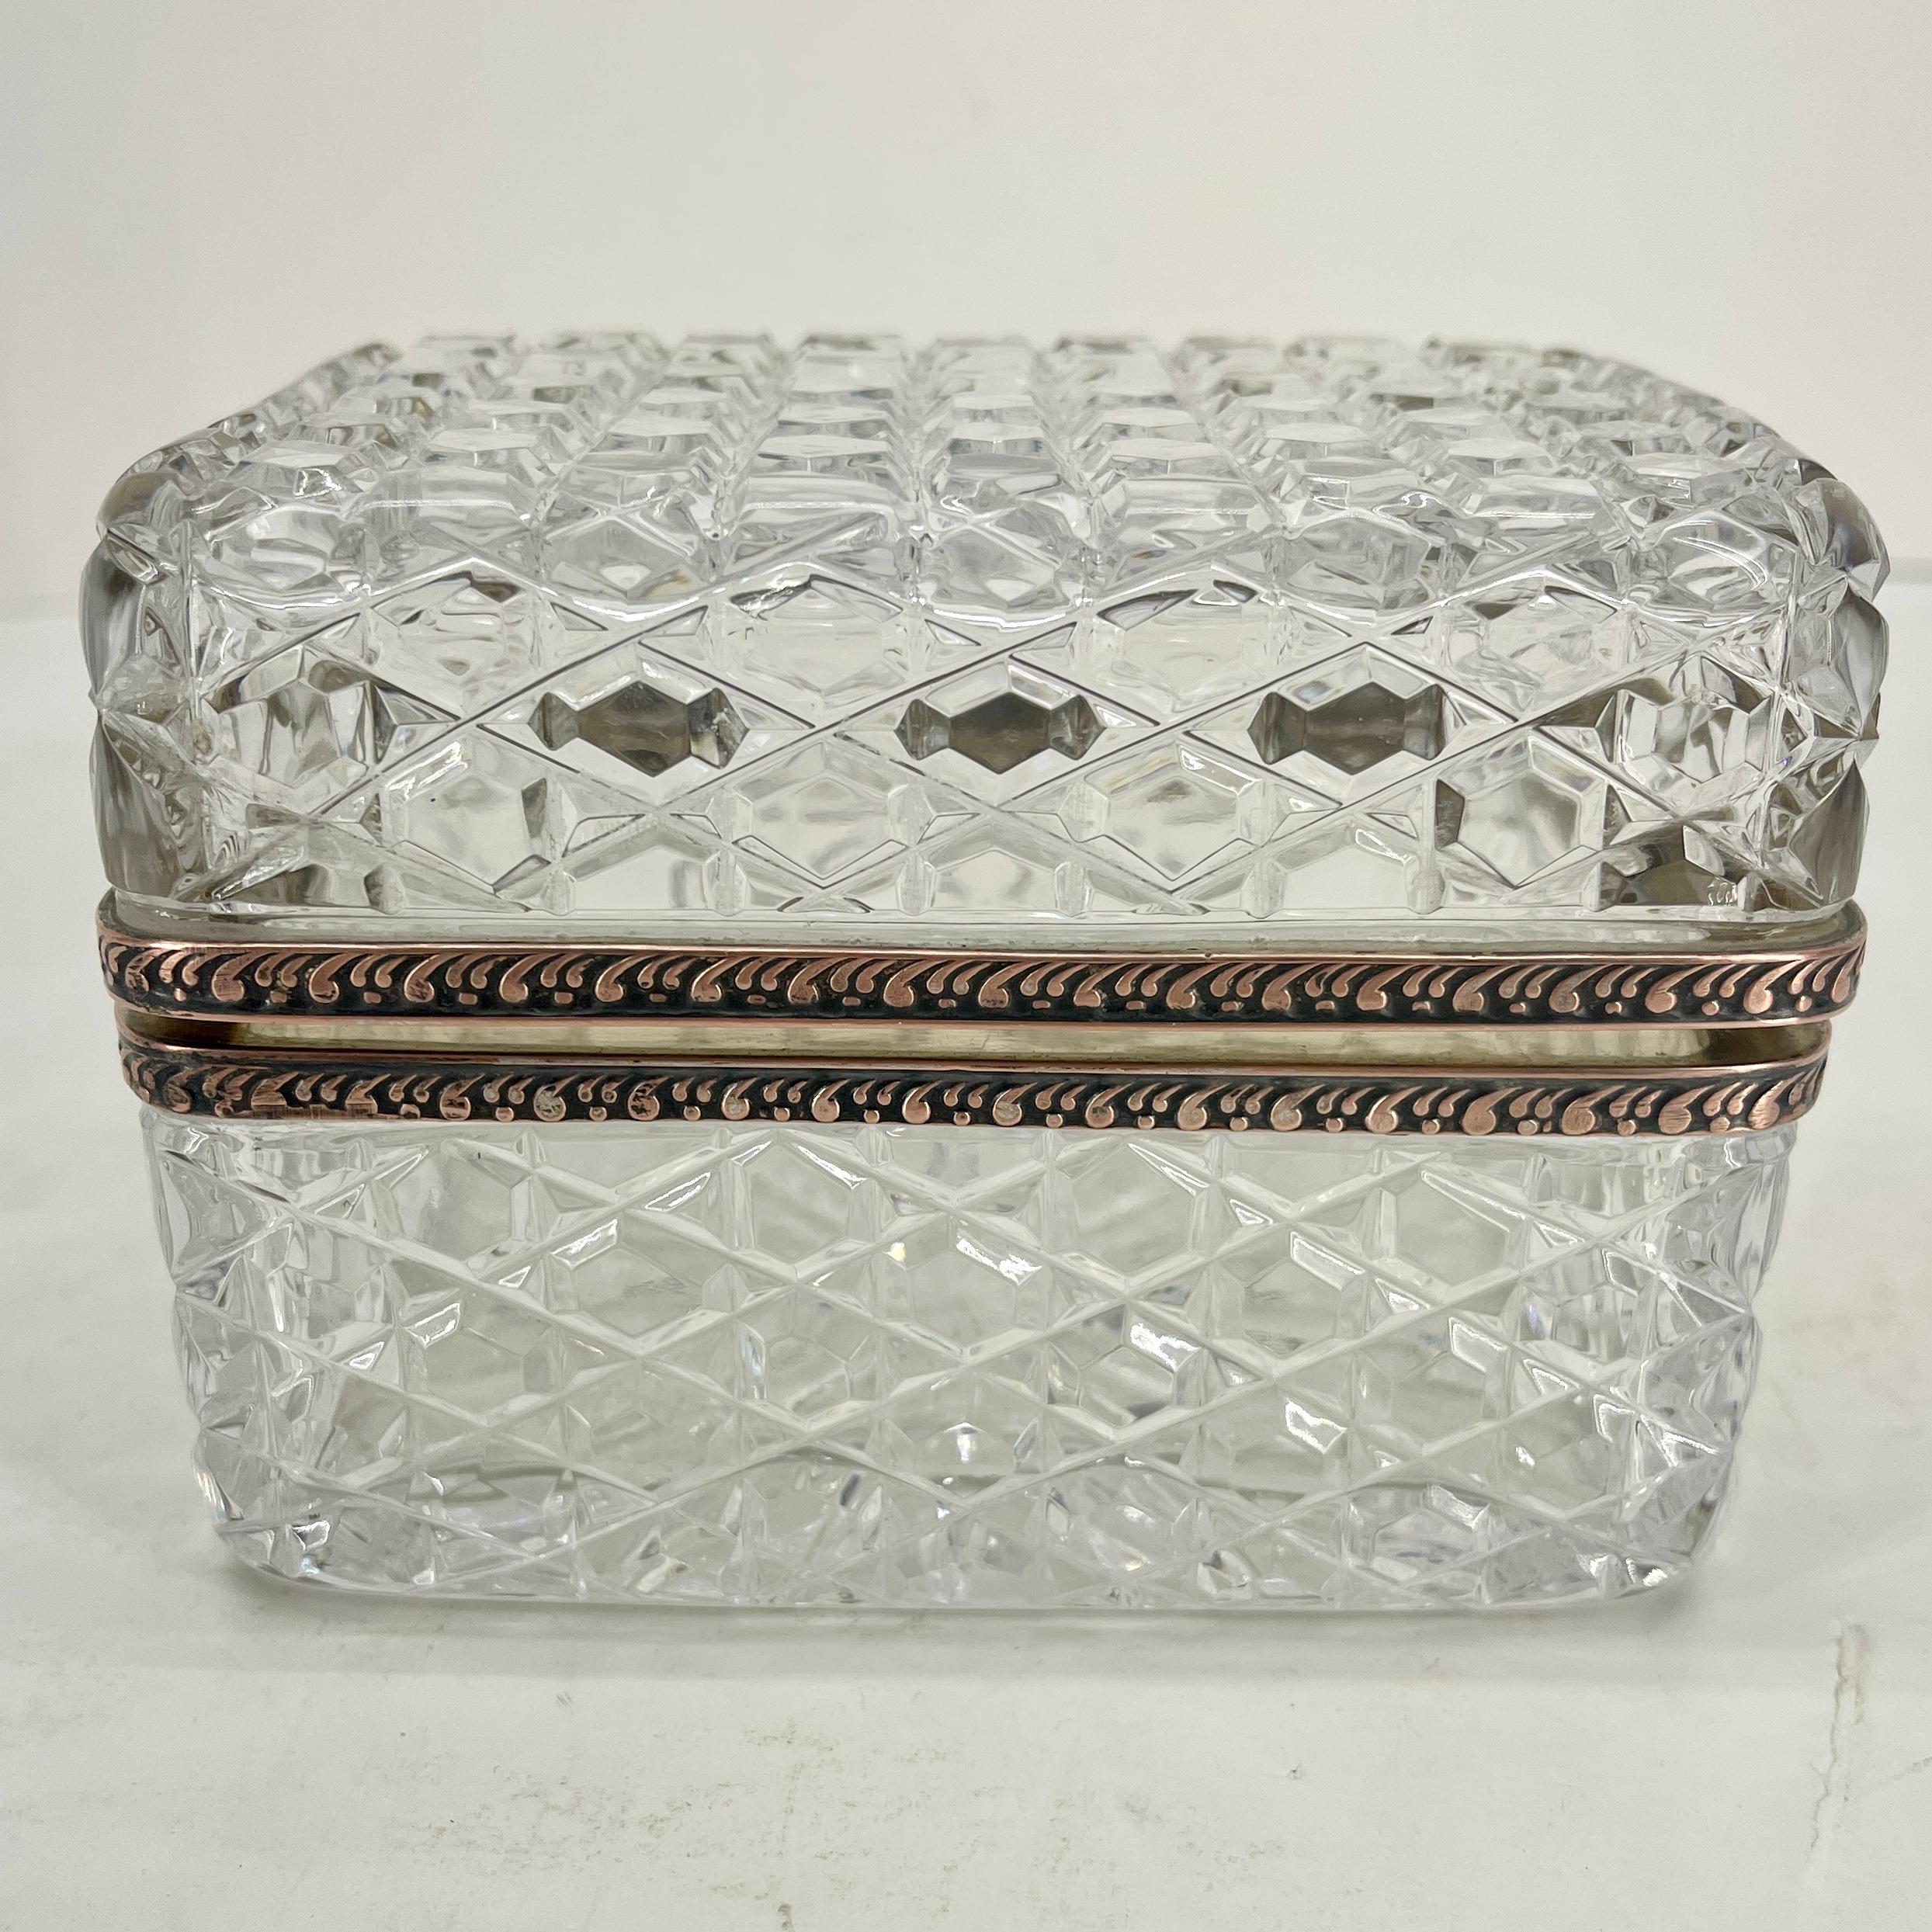 Antique French cut crystal and brass jewelry box, vanity box or candy dish

A beautiful cut crystal and brass jewelry or vanity box. This small cut crystal box is perfect as a desk accessory, a candy dish, a vanity box or jewelry box. The lovely